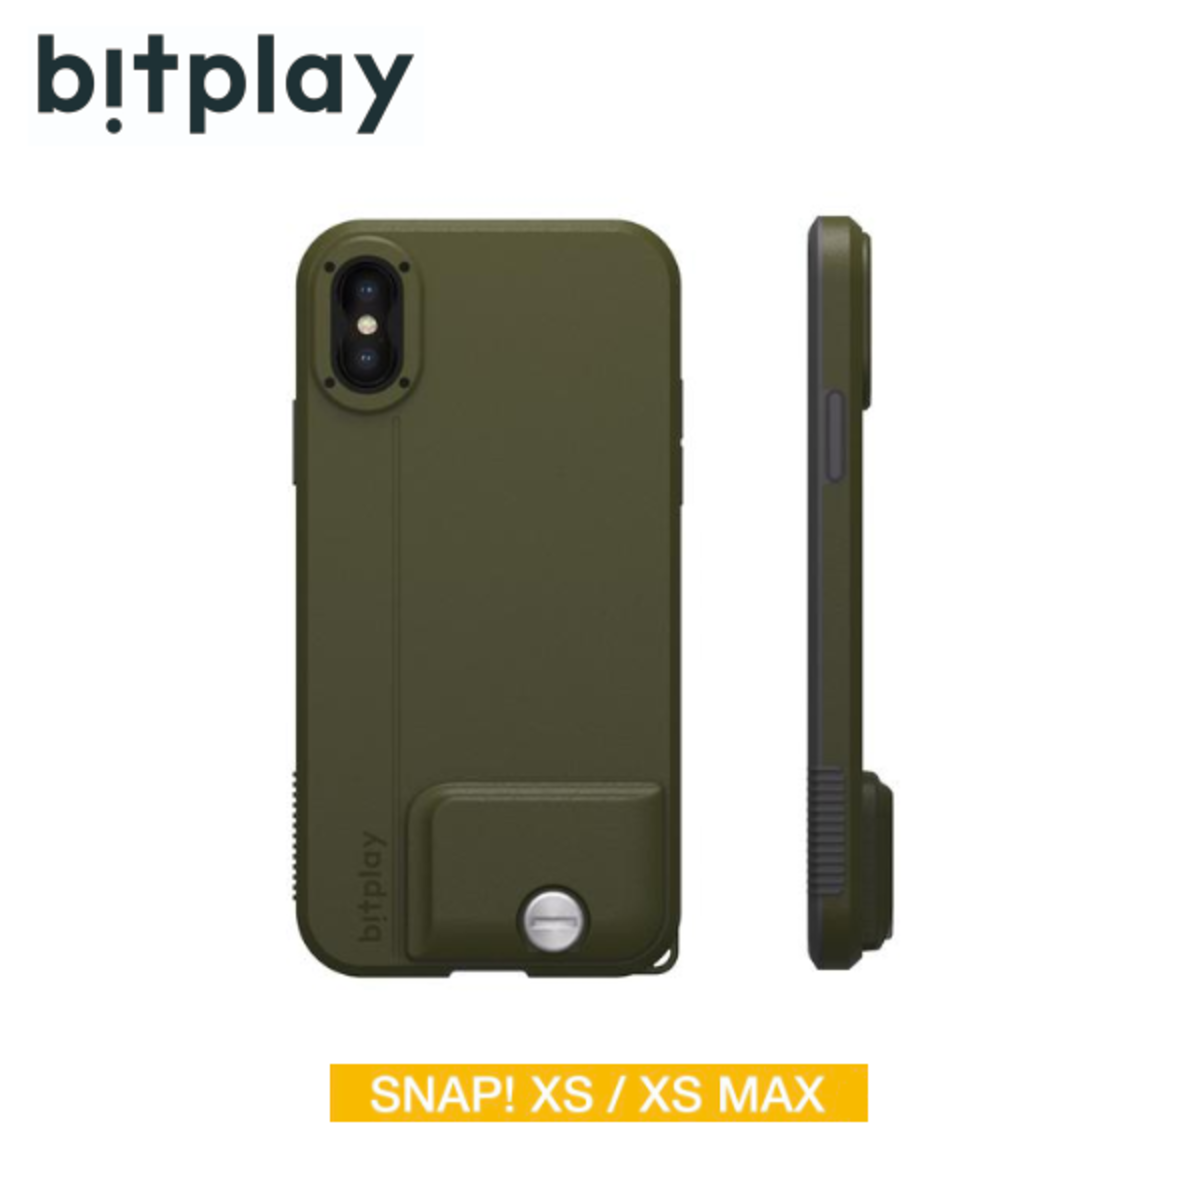 Bitplay - SNAP! iPhone XS/XS Max fully covered lightweight anti-fall camera case - Army Green